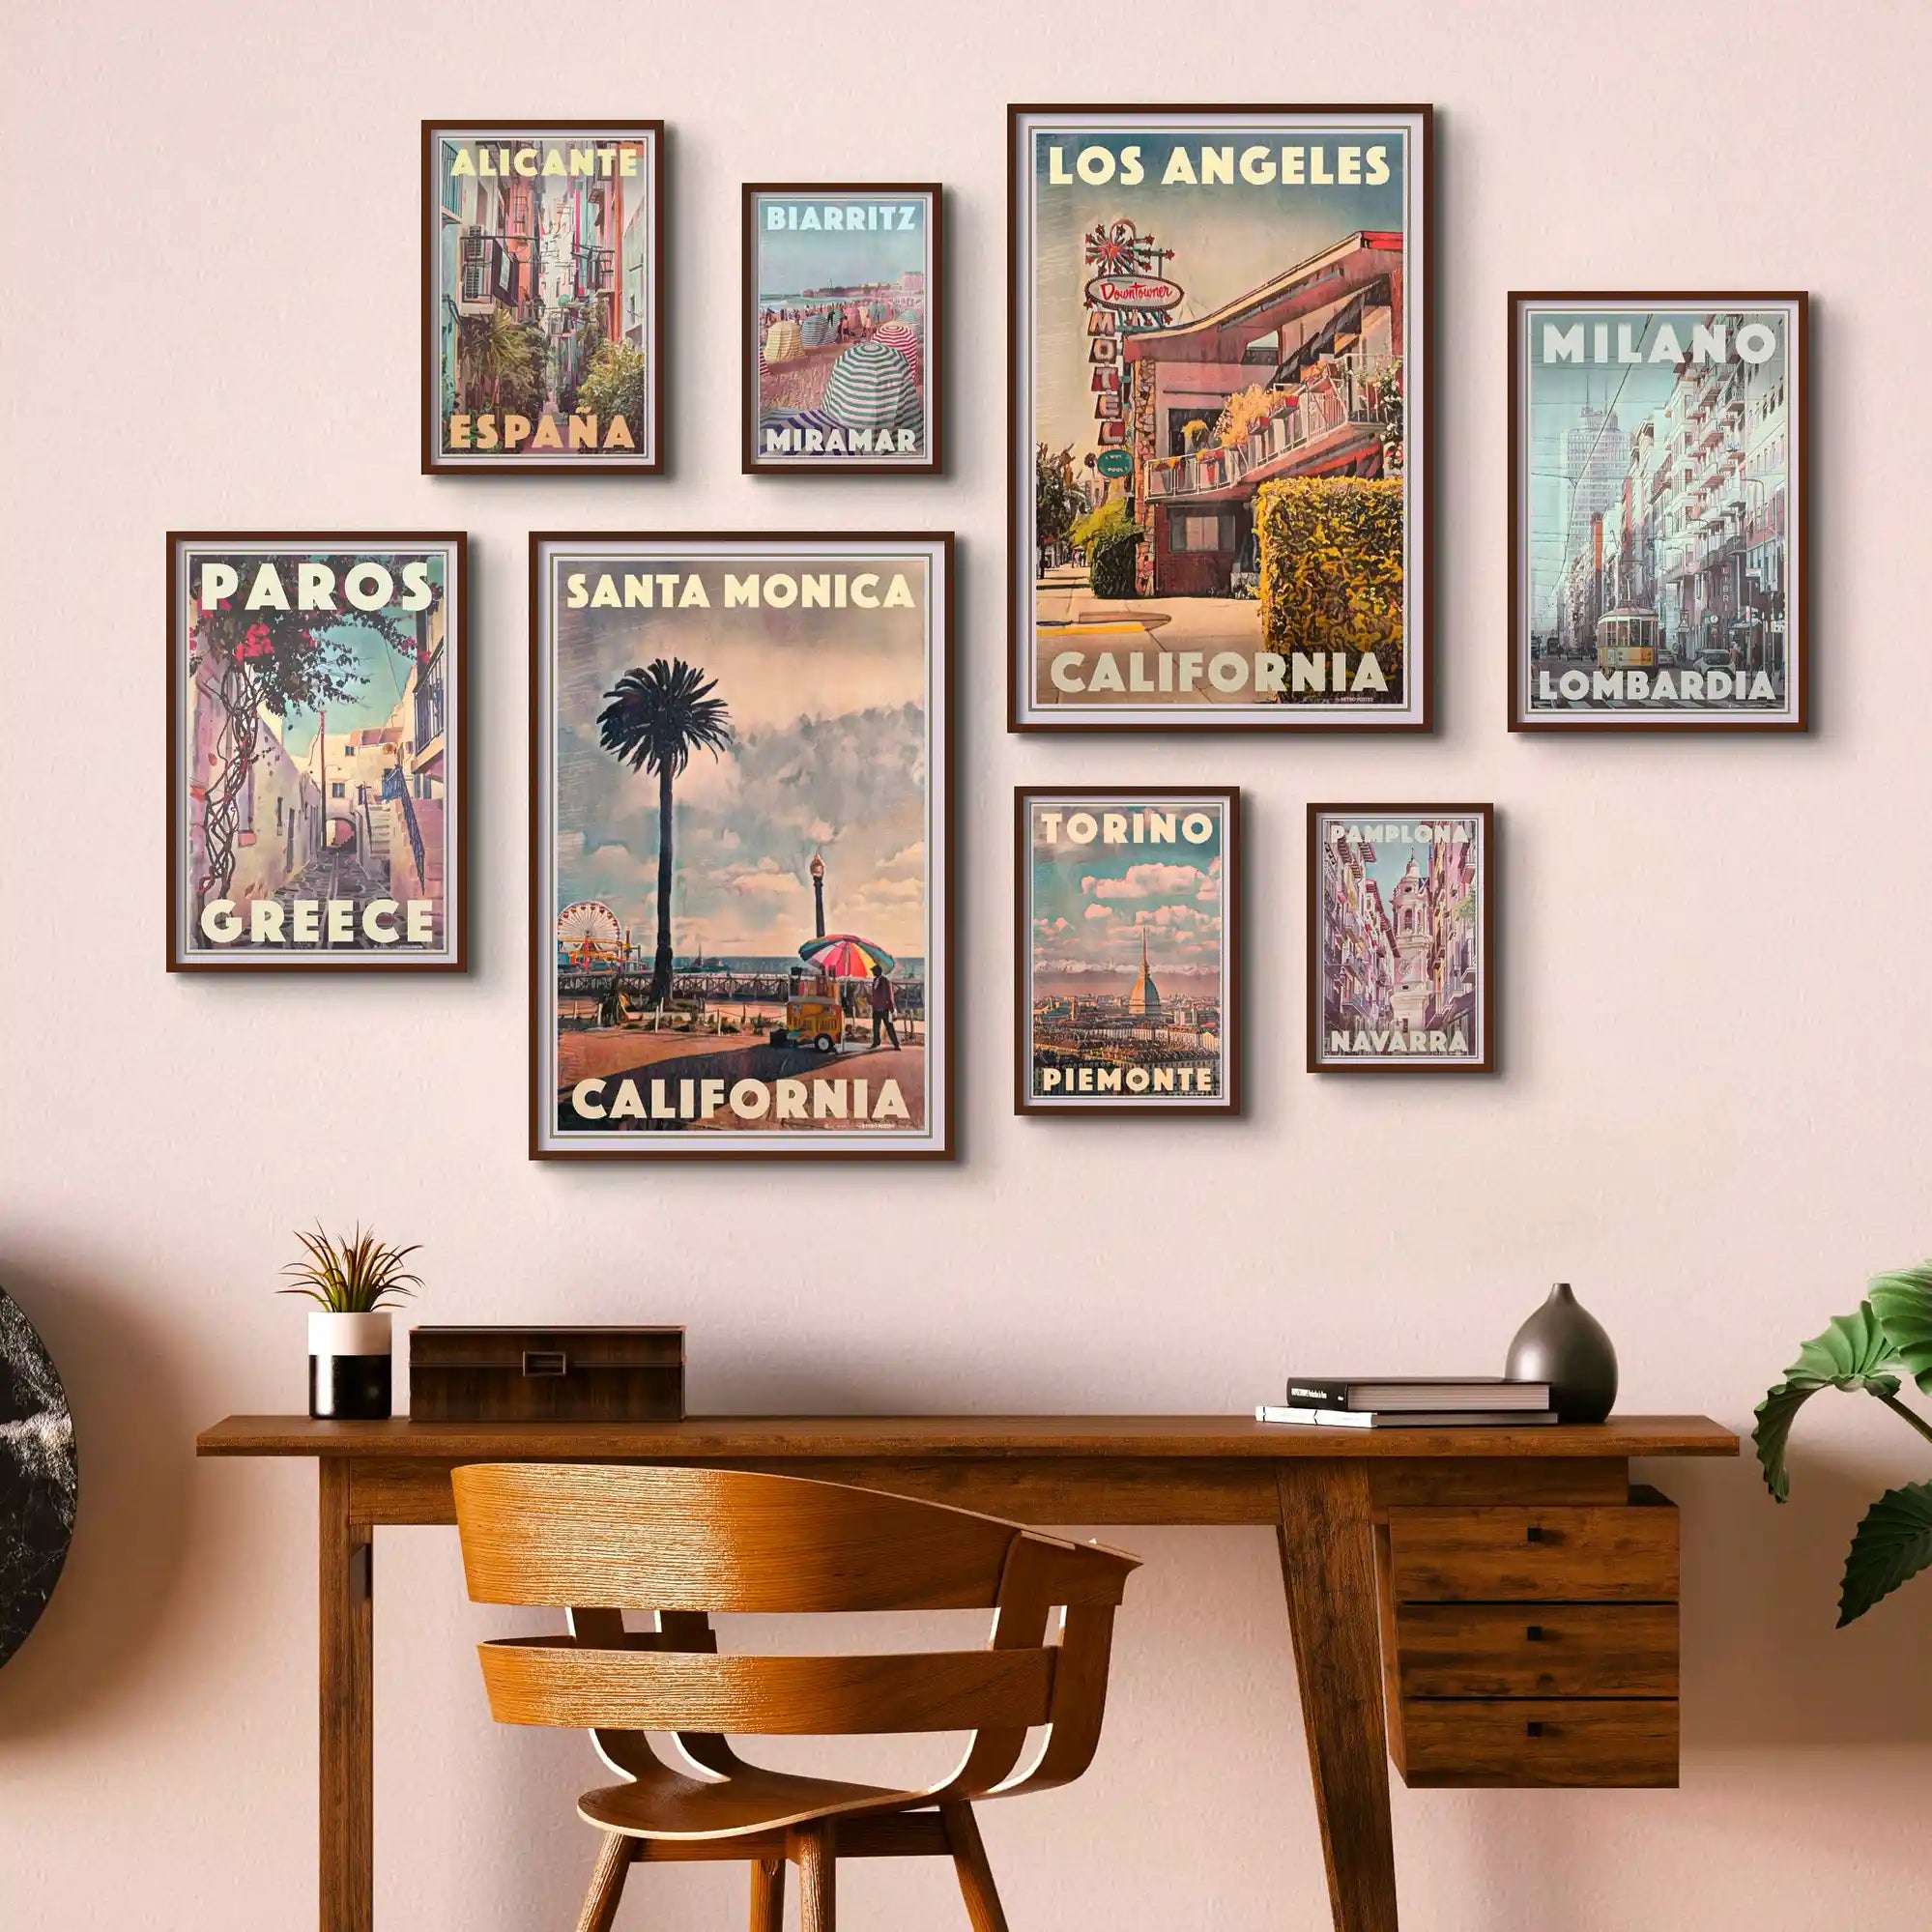 Artful travels by Alecse: Vintage and Retro Travel Poster Art